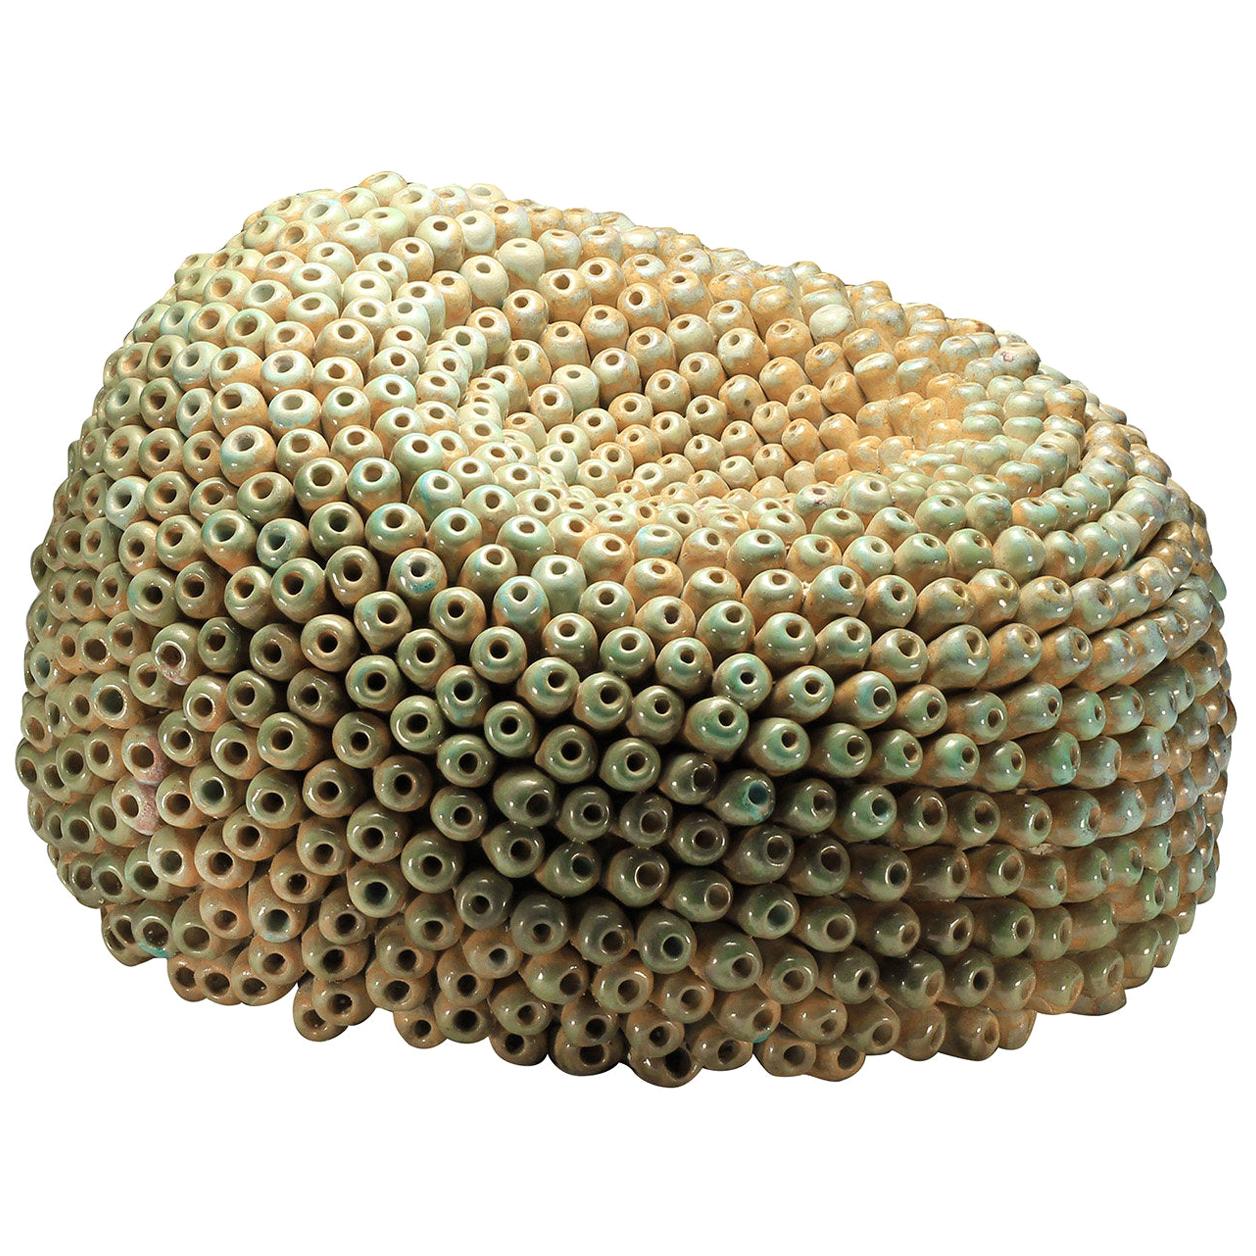 Coral Formation 1 Sculpture